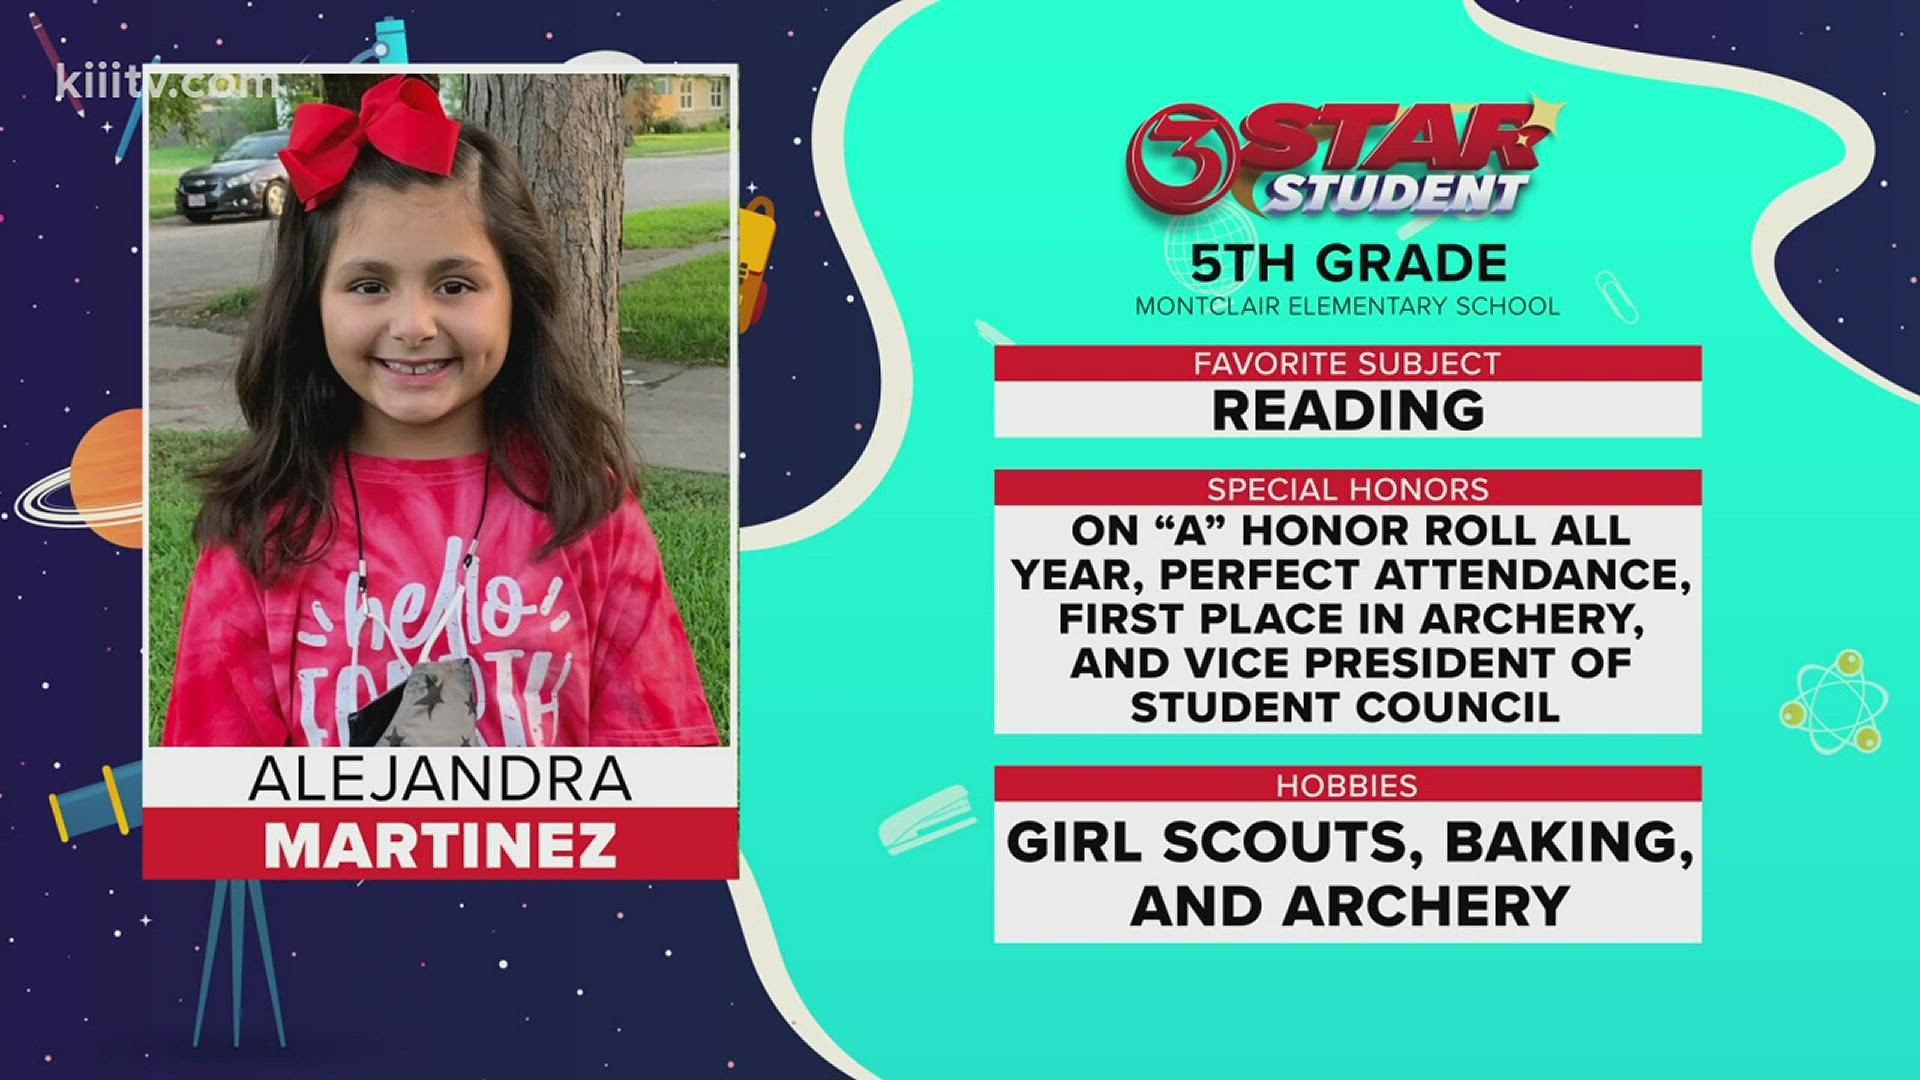 Alejandra is a fifth grade student at Montclair Elementary School here in Corpus Christi. She said reading is her favorite subject and she is a straight "A" student!